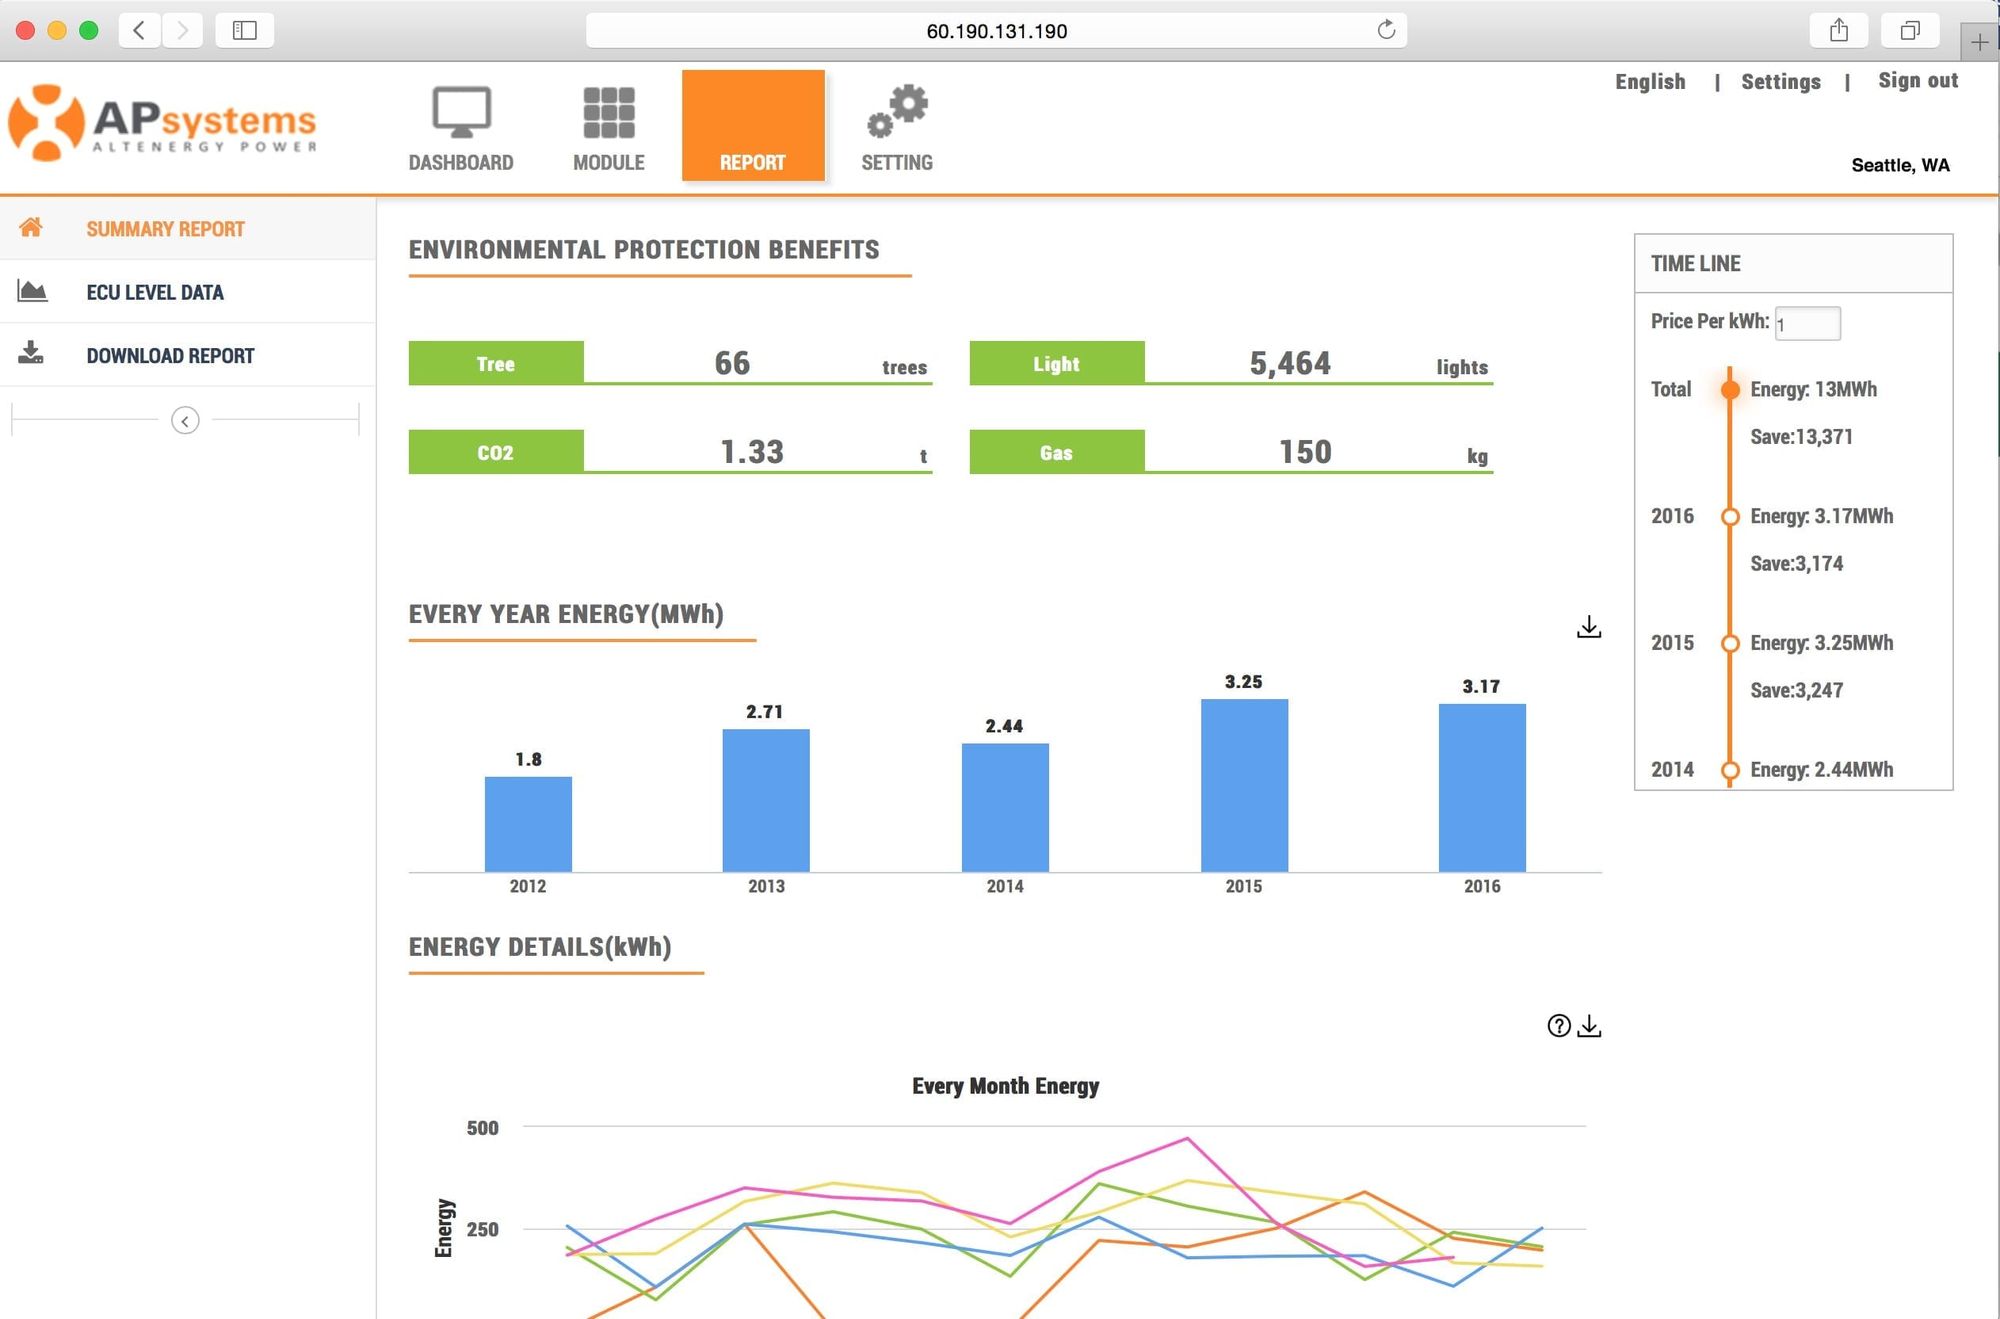 Sample Image of AP Systems EMA Web Dashboards